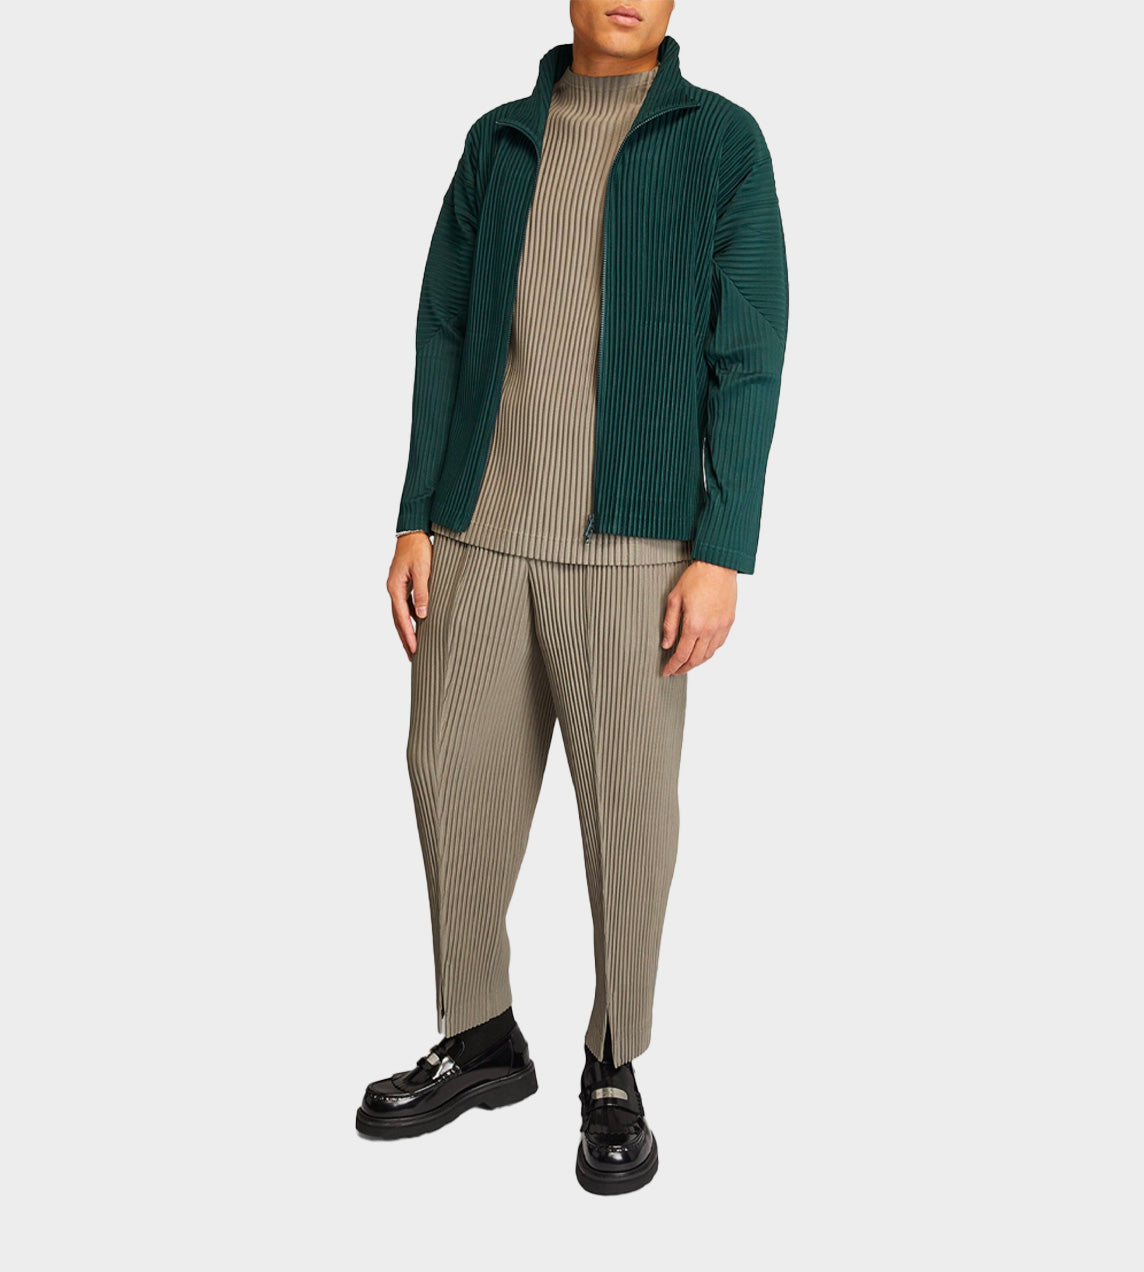 Homme Plisse Issey Miyake - Colour Pleats Zip Up Cardigan D. Green